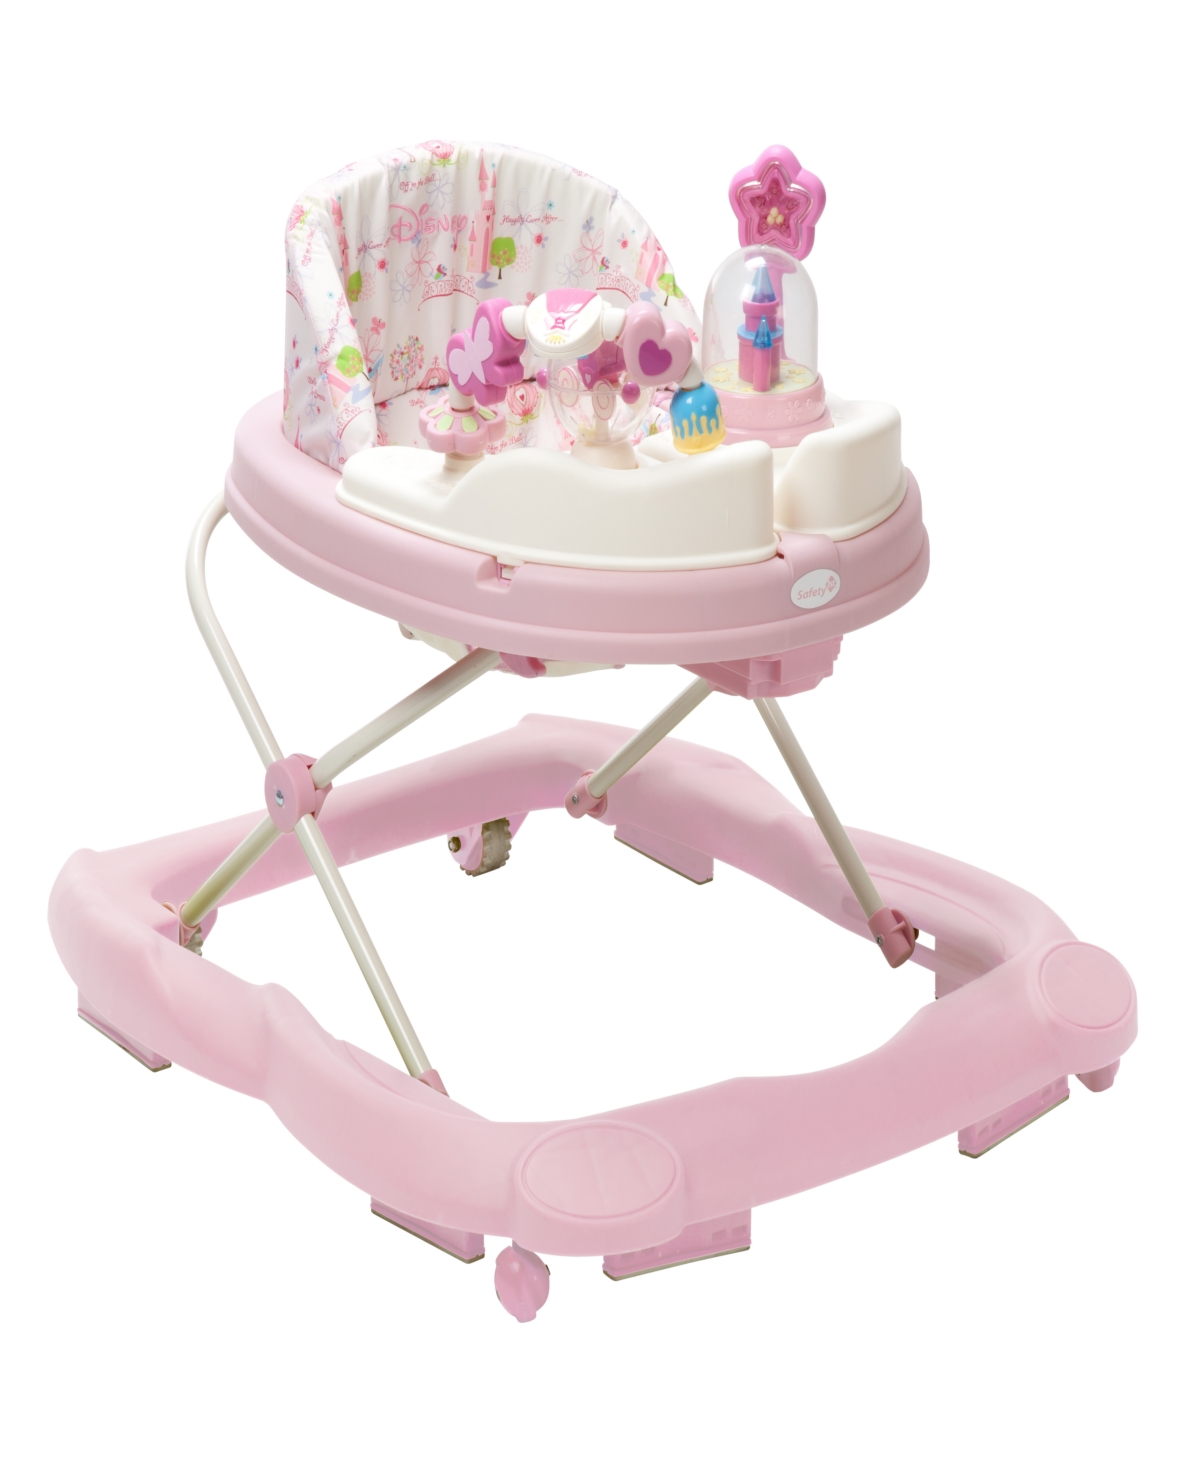 Disney Baby Music & Lights Walker In Happily Ever After